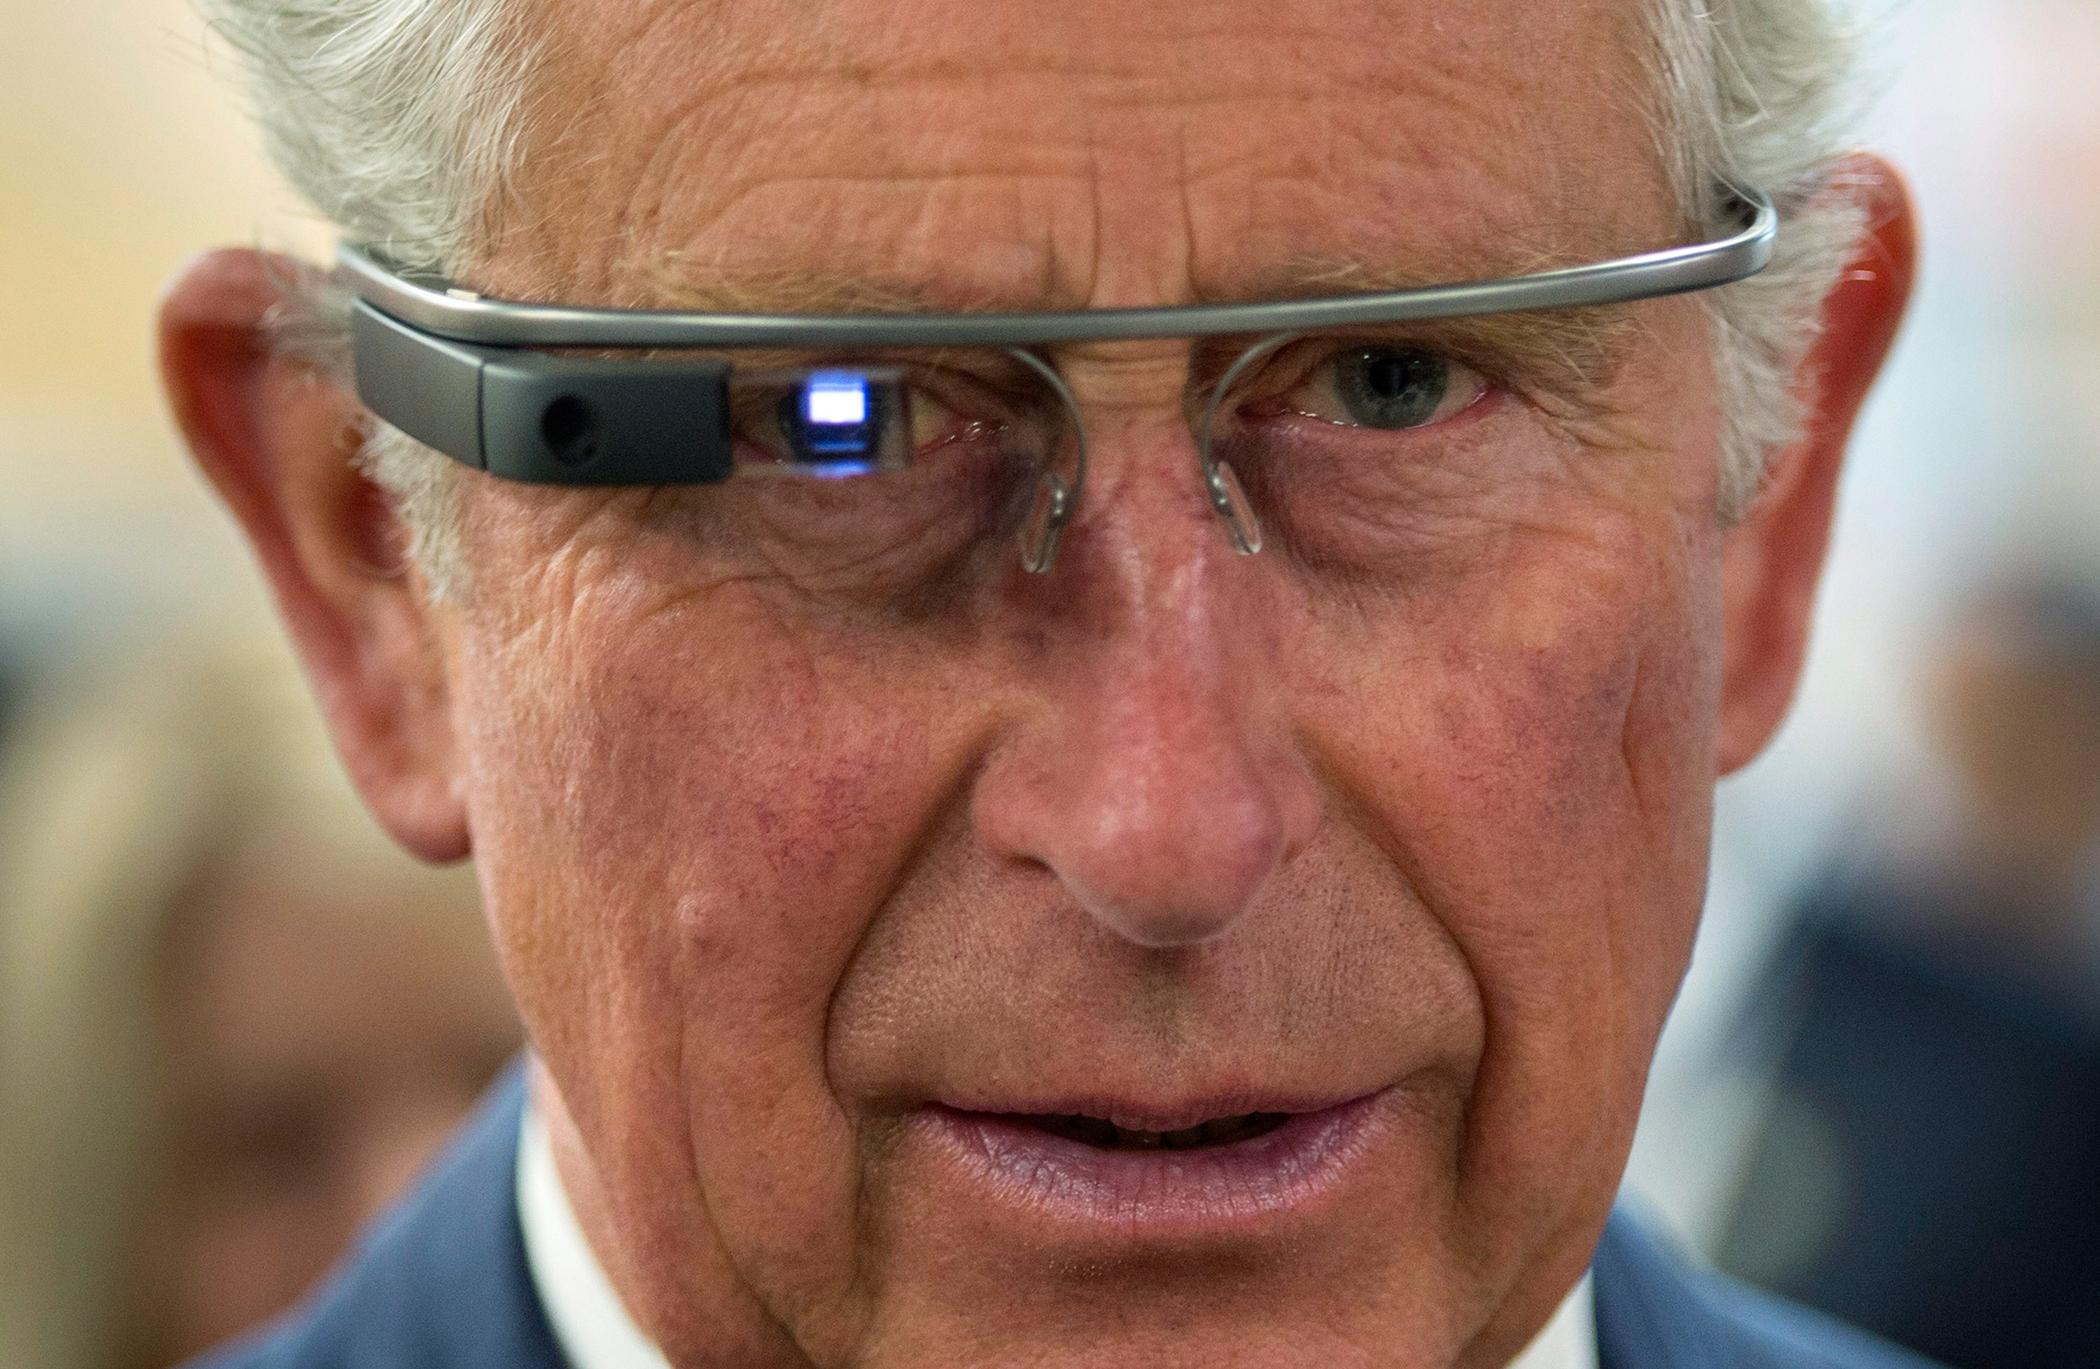 Prince Charles tries on Google Glass in Winnipeg on May 21, 2014.